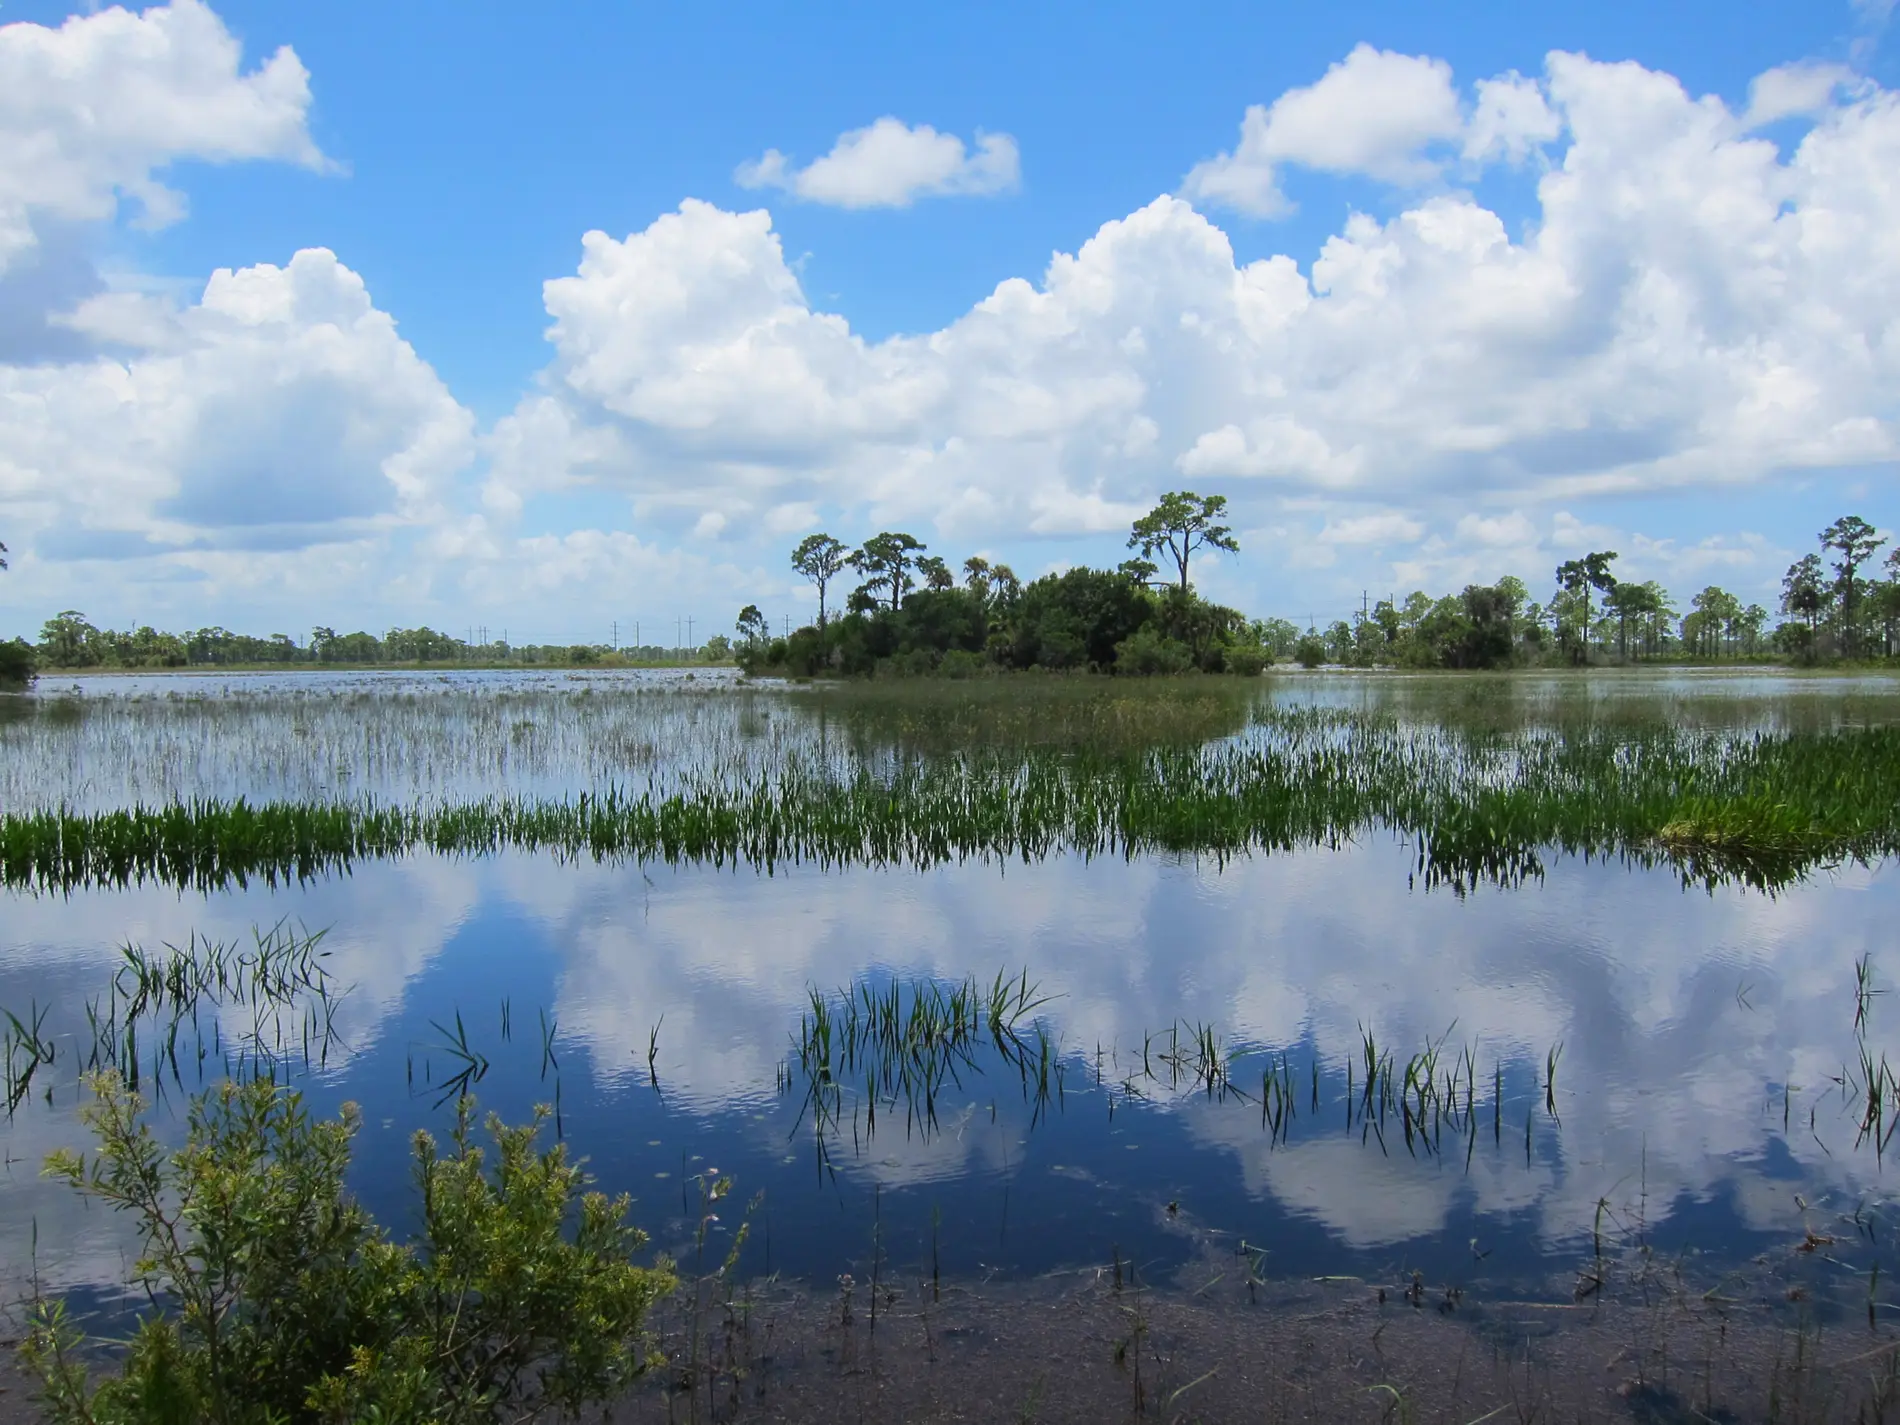 Restored wetland hydroperiods in Yucca Pens Preserve, part of the Coastal and Heartland National Estuary restoration program in Lee County, Cape Coral, FL.